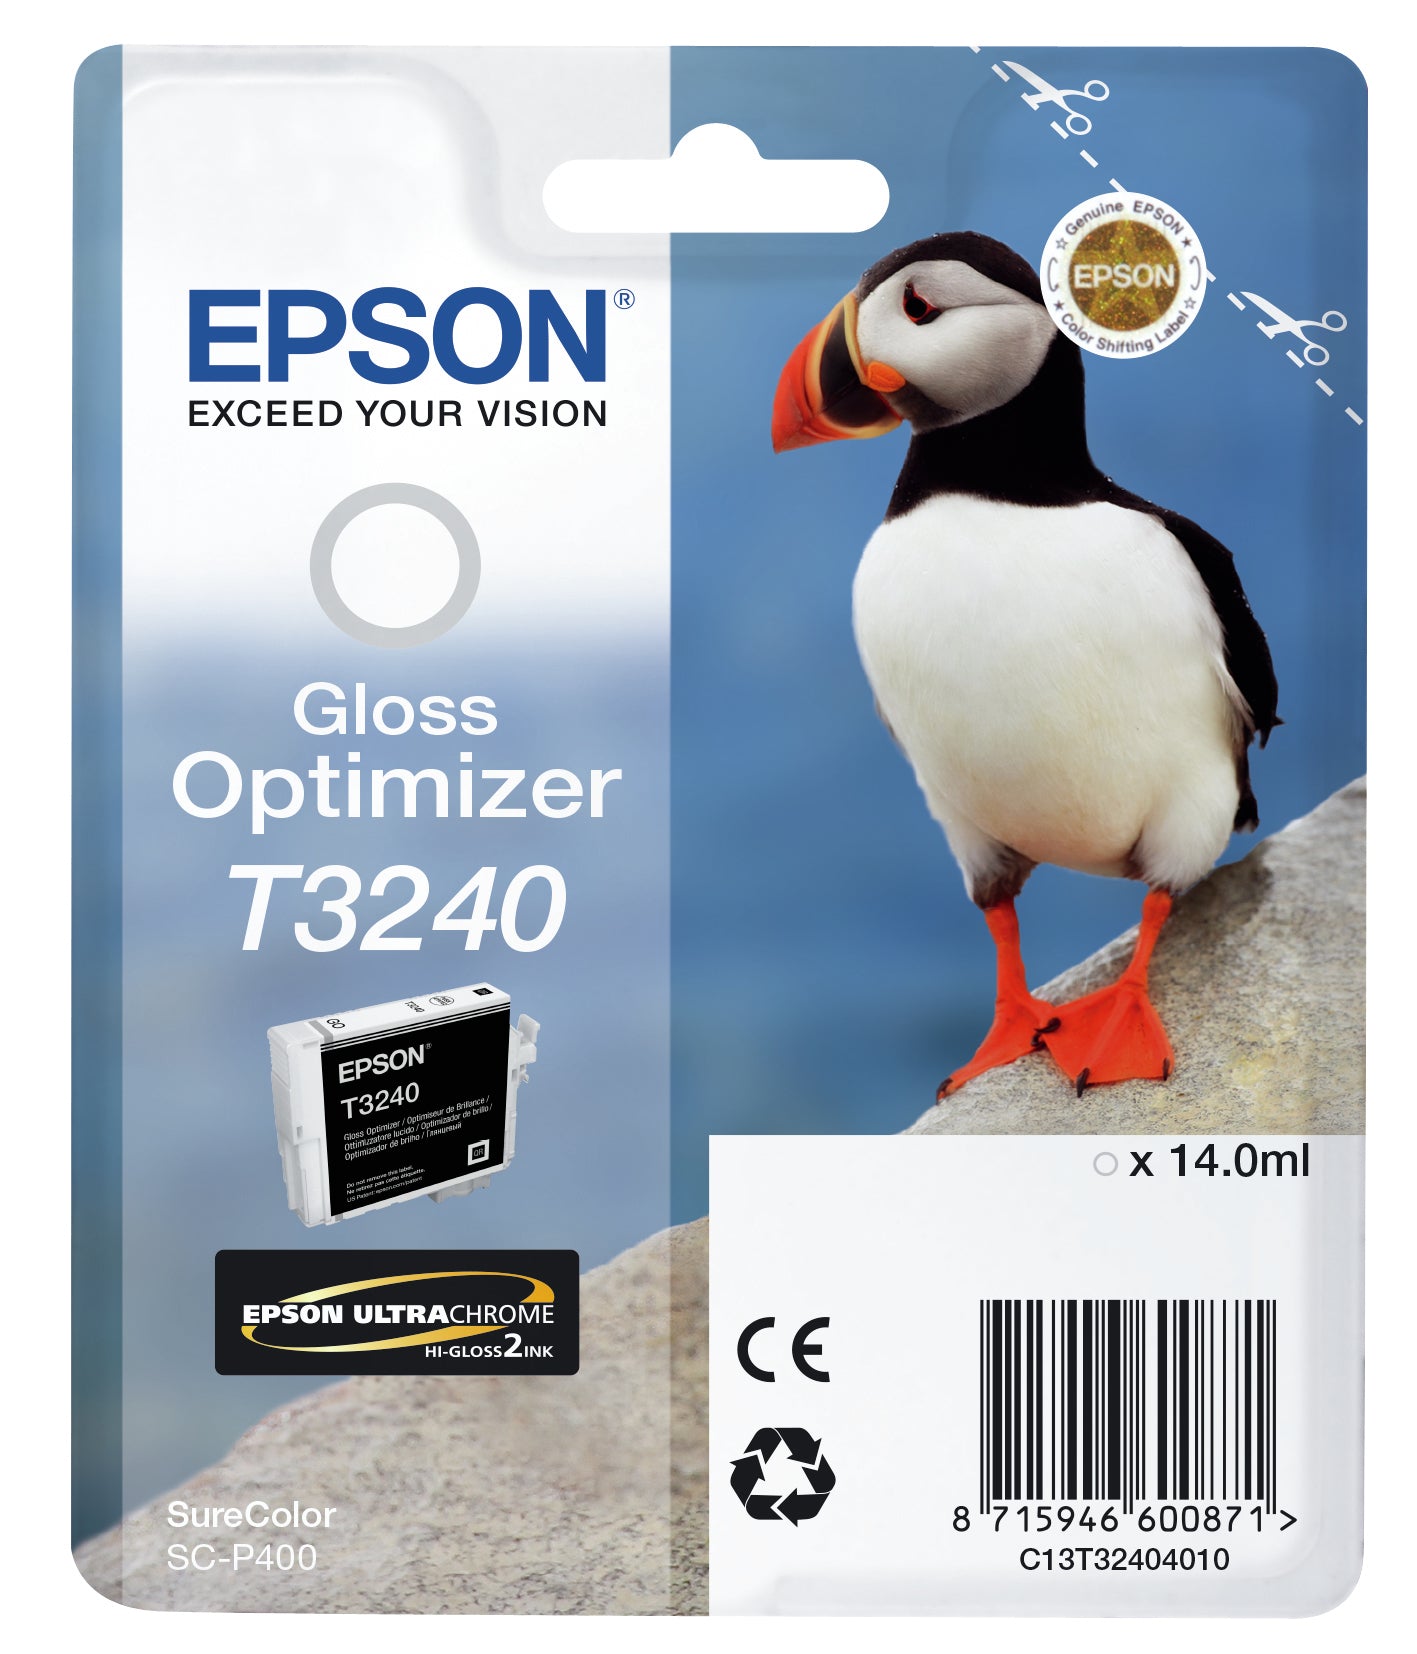 Epson C13T32404010/T3240 Ink cartridge Gloss-Optimizer, 3.35K pages 14ml for Epson SC-P 400